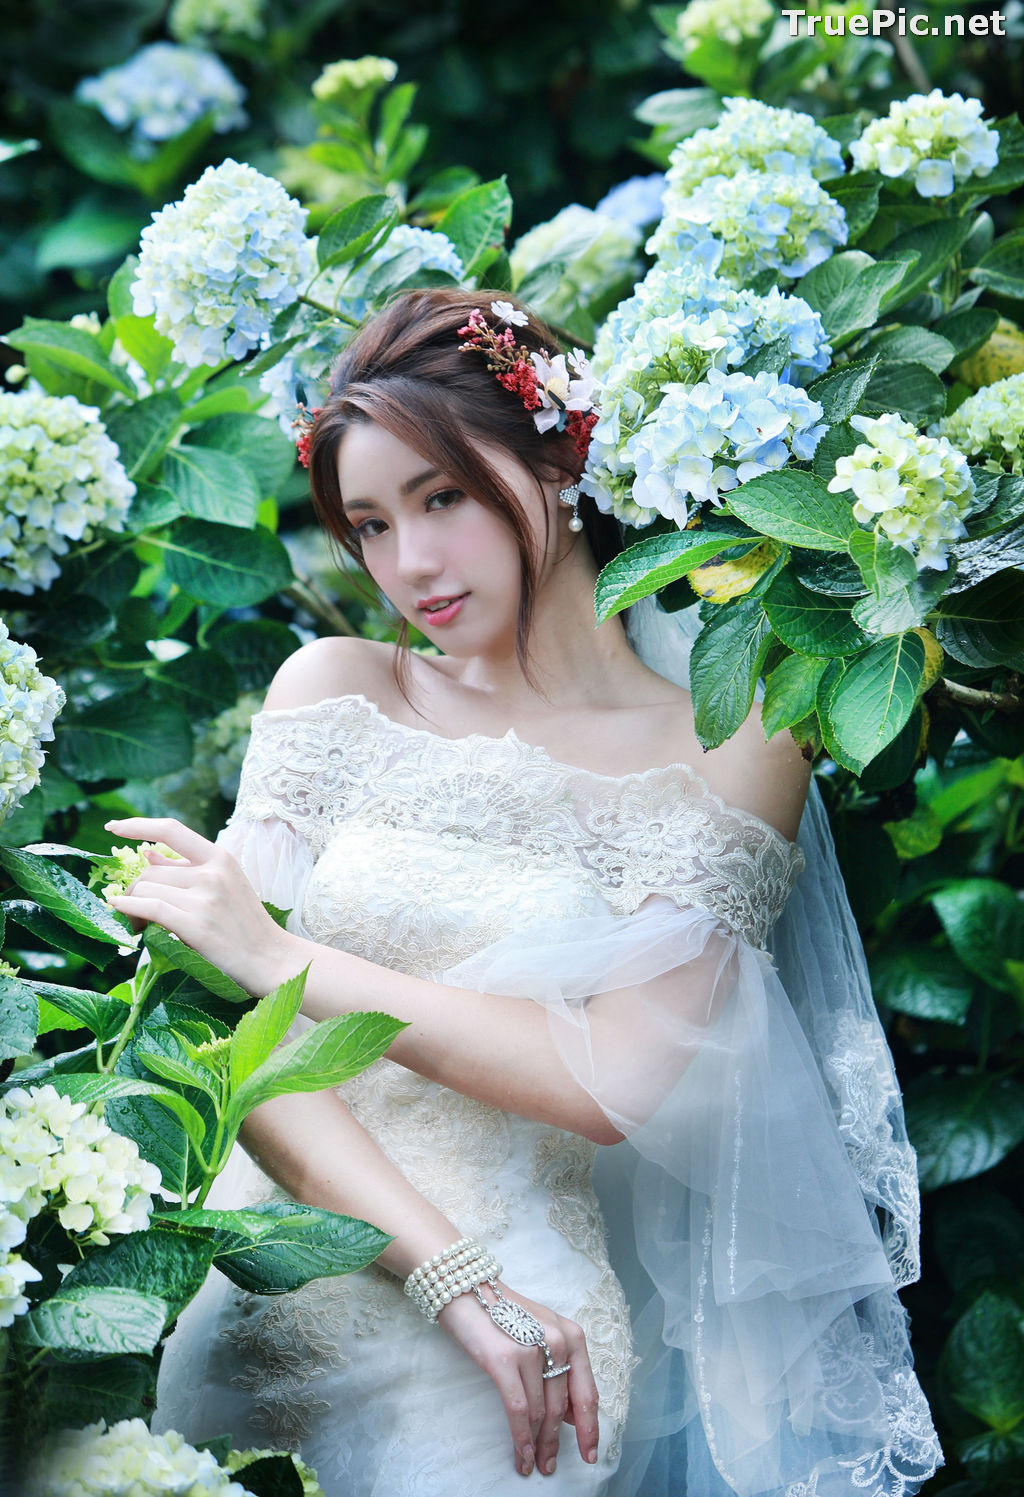 Image Taiwanese Model - 張倫甄 - Beautiful Bride and Hydrangea Flowers - TruePic.net - Picture-51